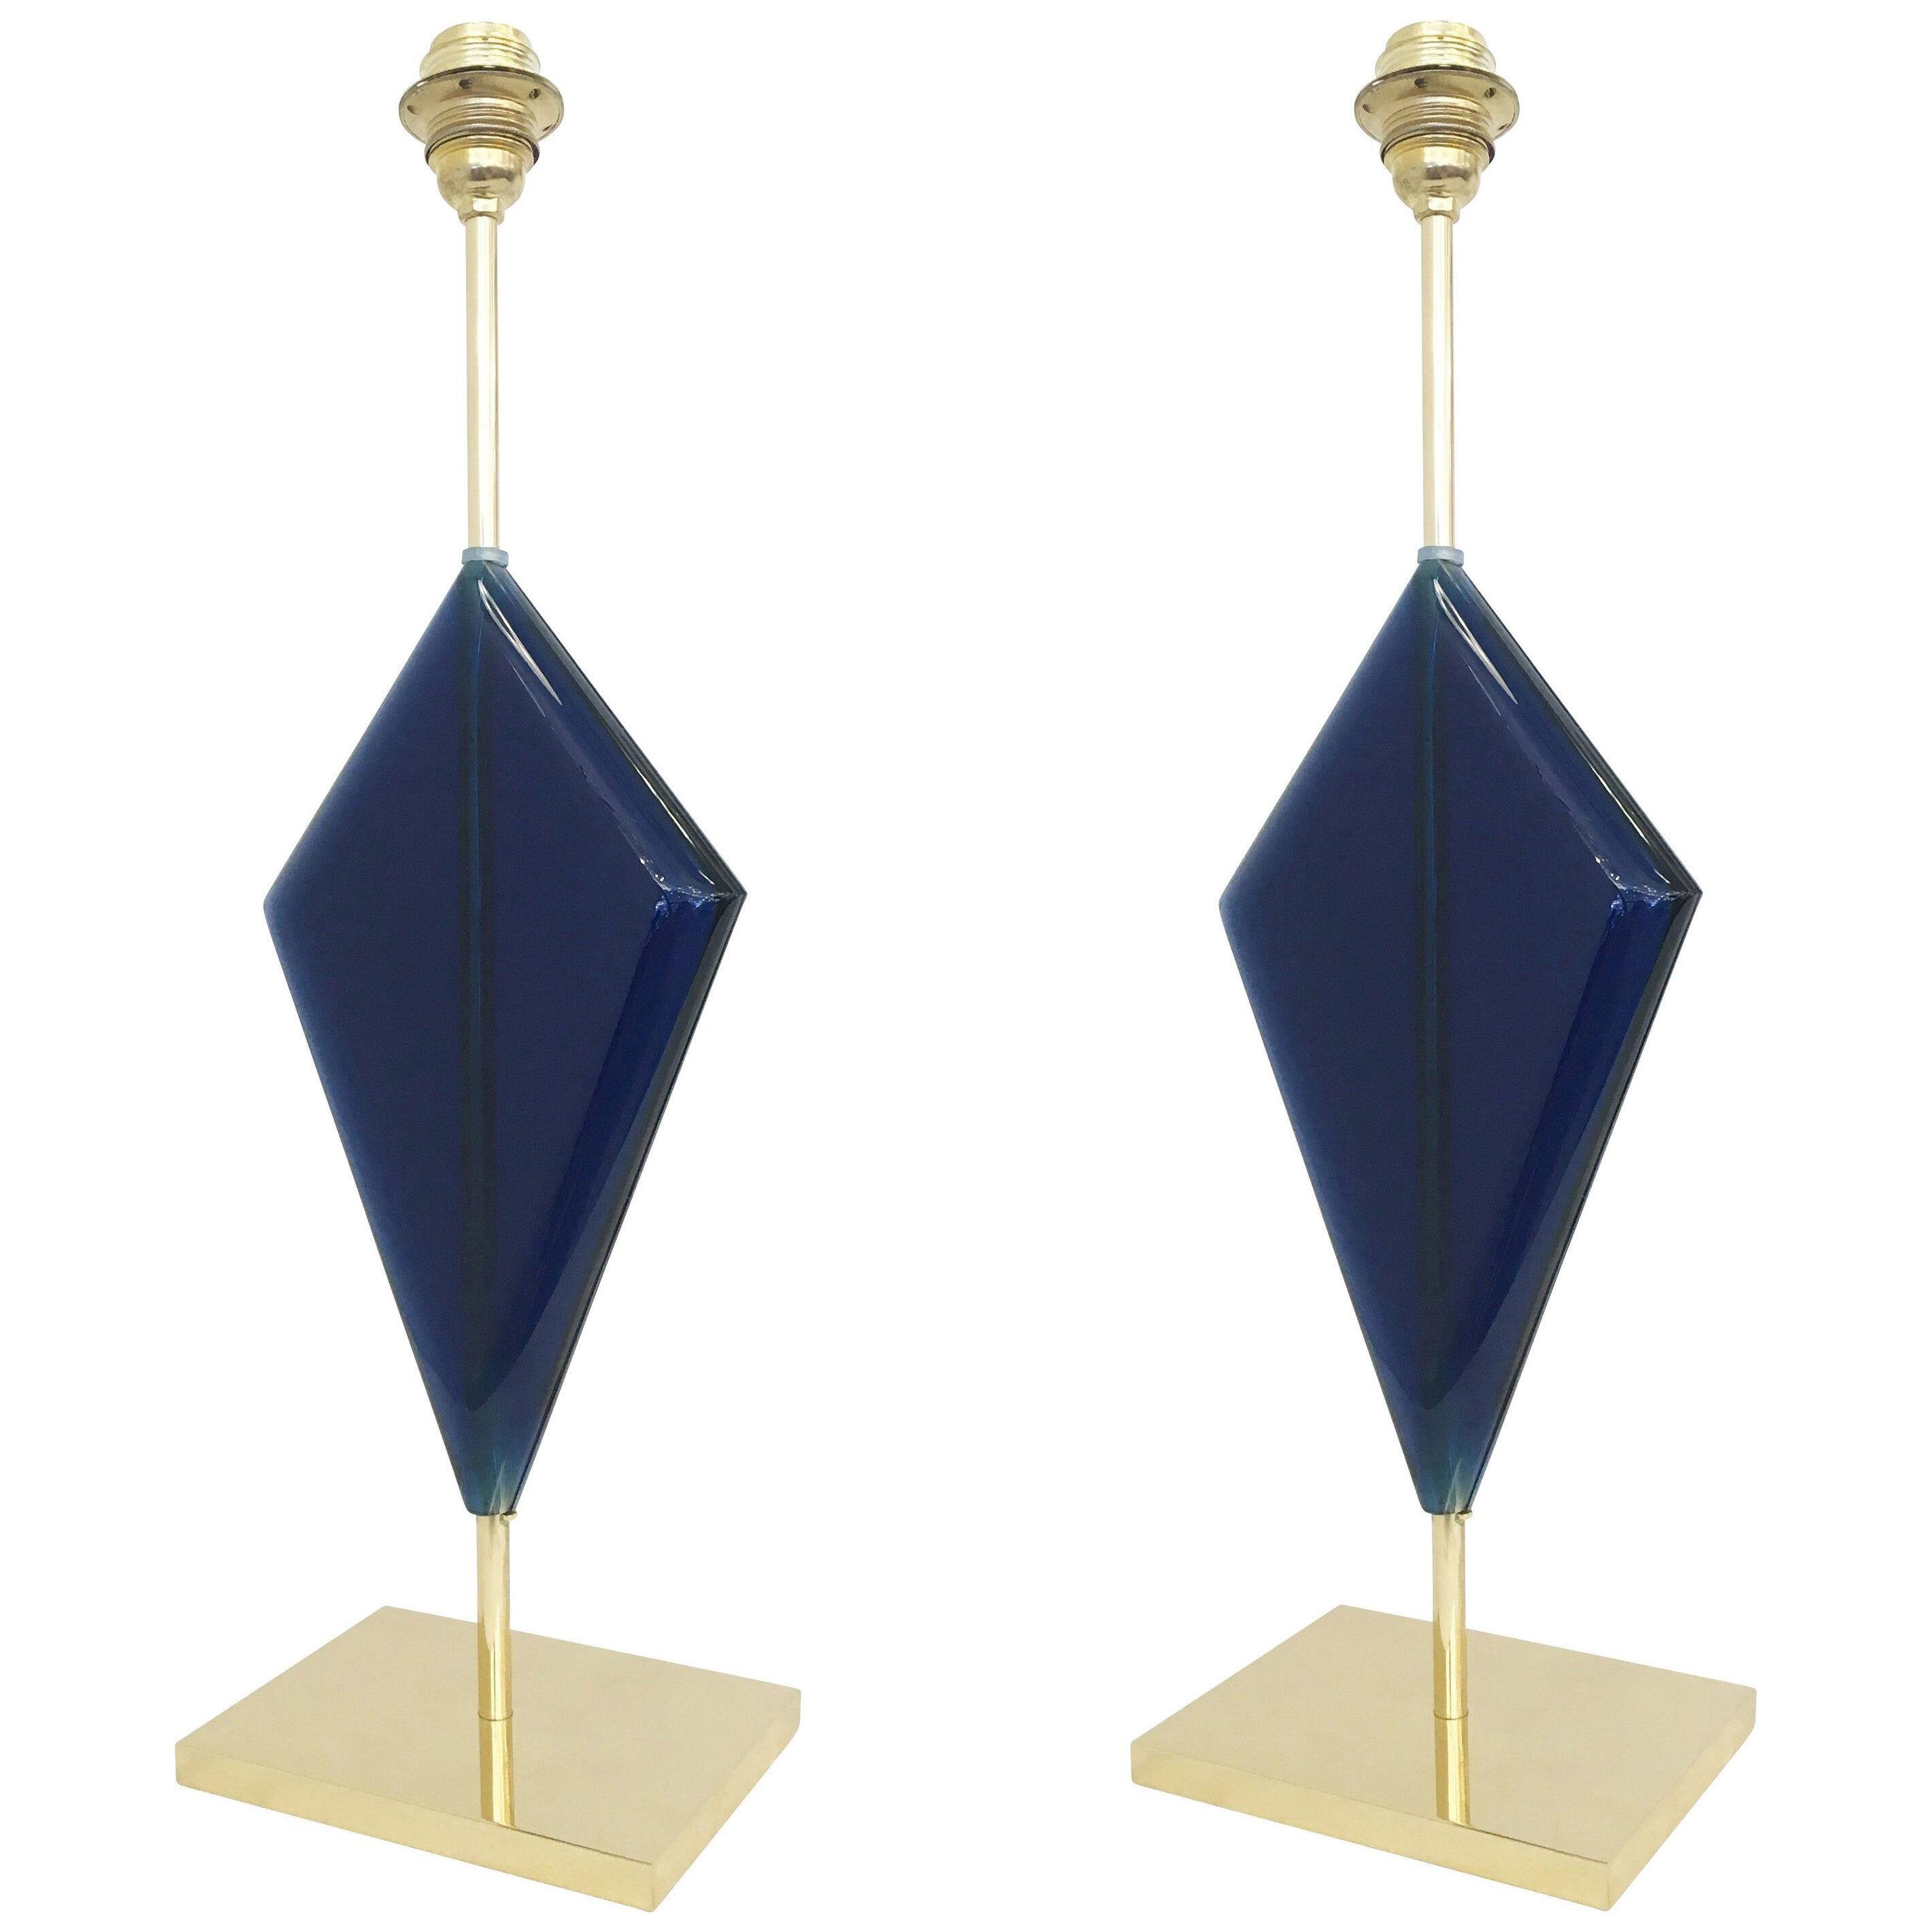 Lapis Table Lamp by Effetto Vetro for Gaspare Asaro